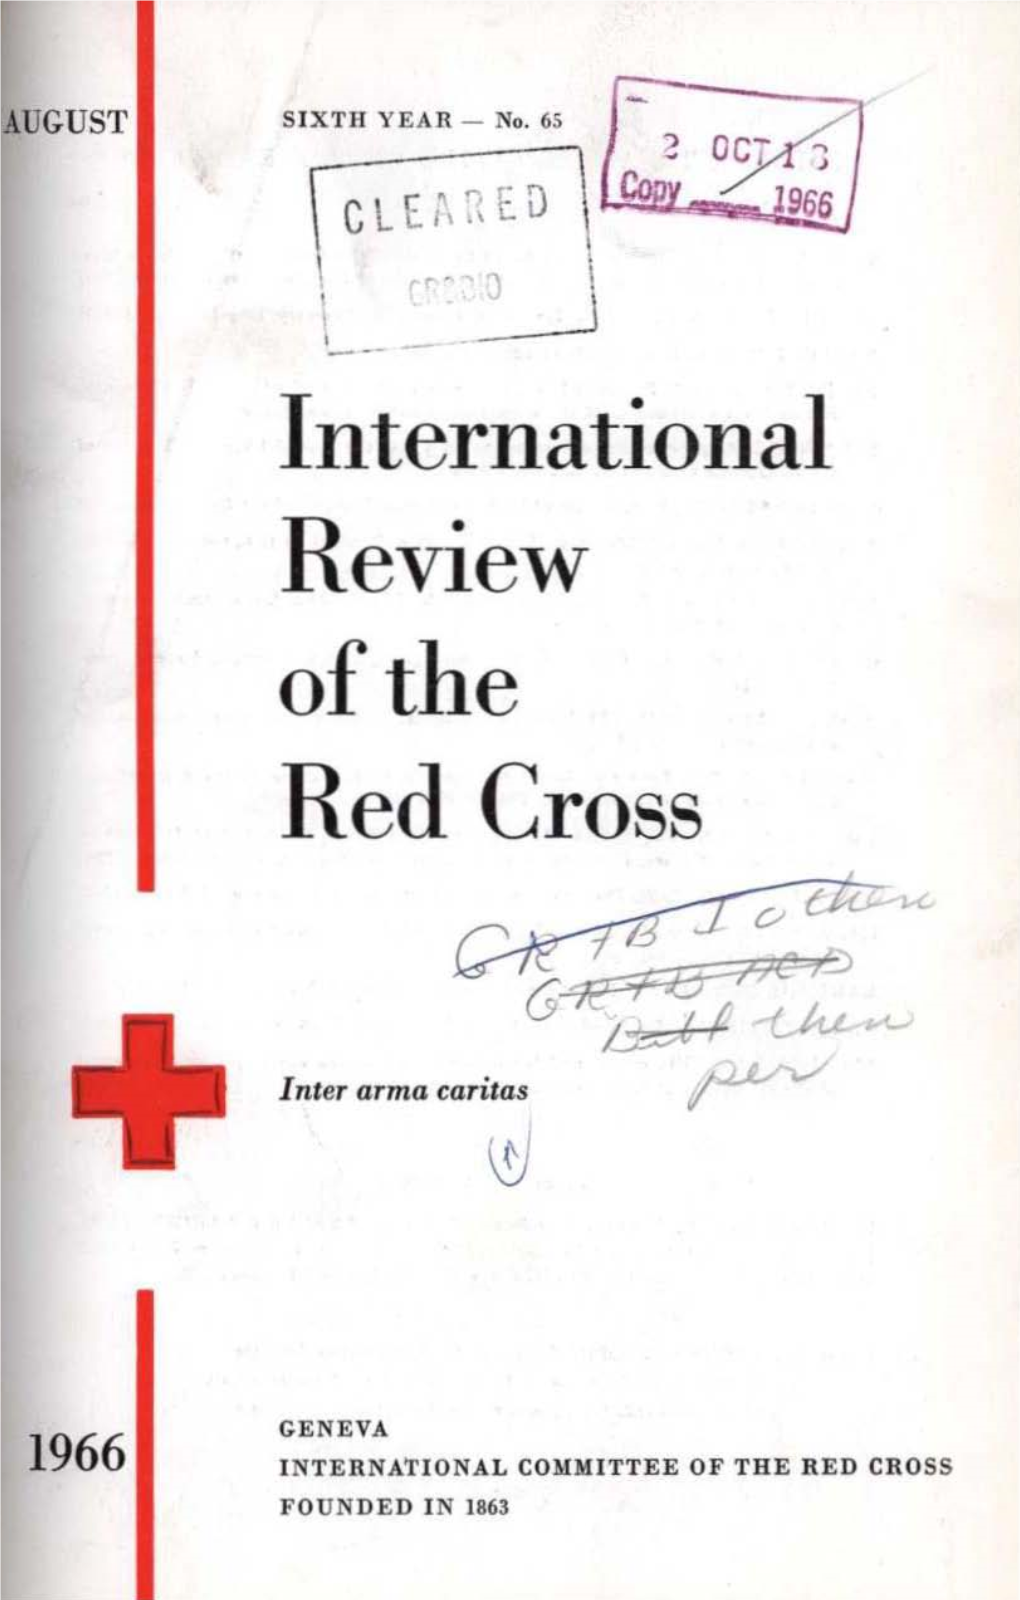 International Review of the Red Cross, August 1966, Sixth Year